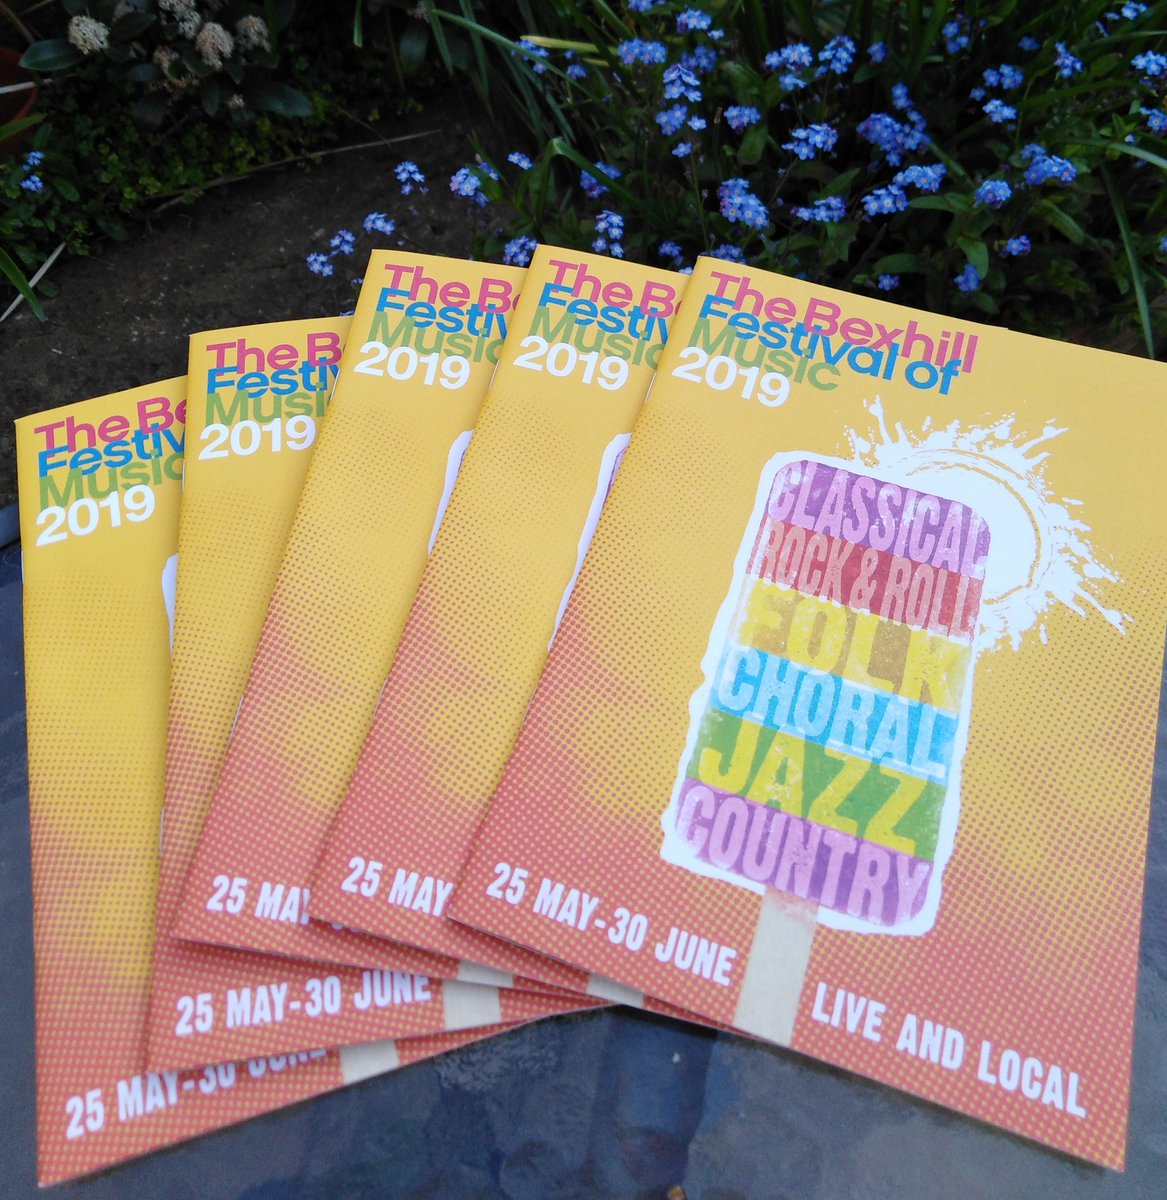 The Bexhill Festival of Music 2019 programmes are now available.  Pick up a copy from #delawarrpavilion #Bexhill #EastSussex #Bexhilllibrary #music #Sussex